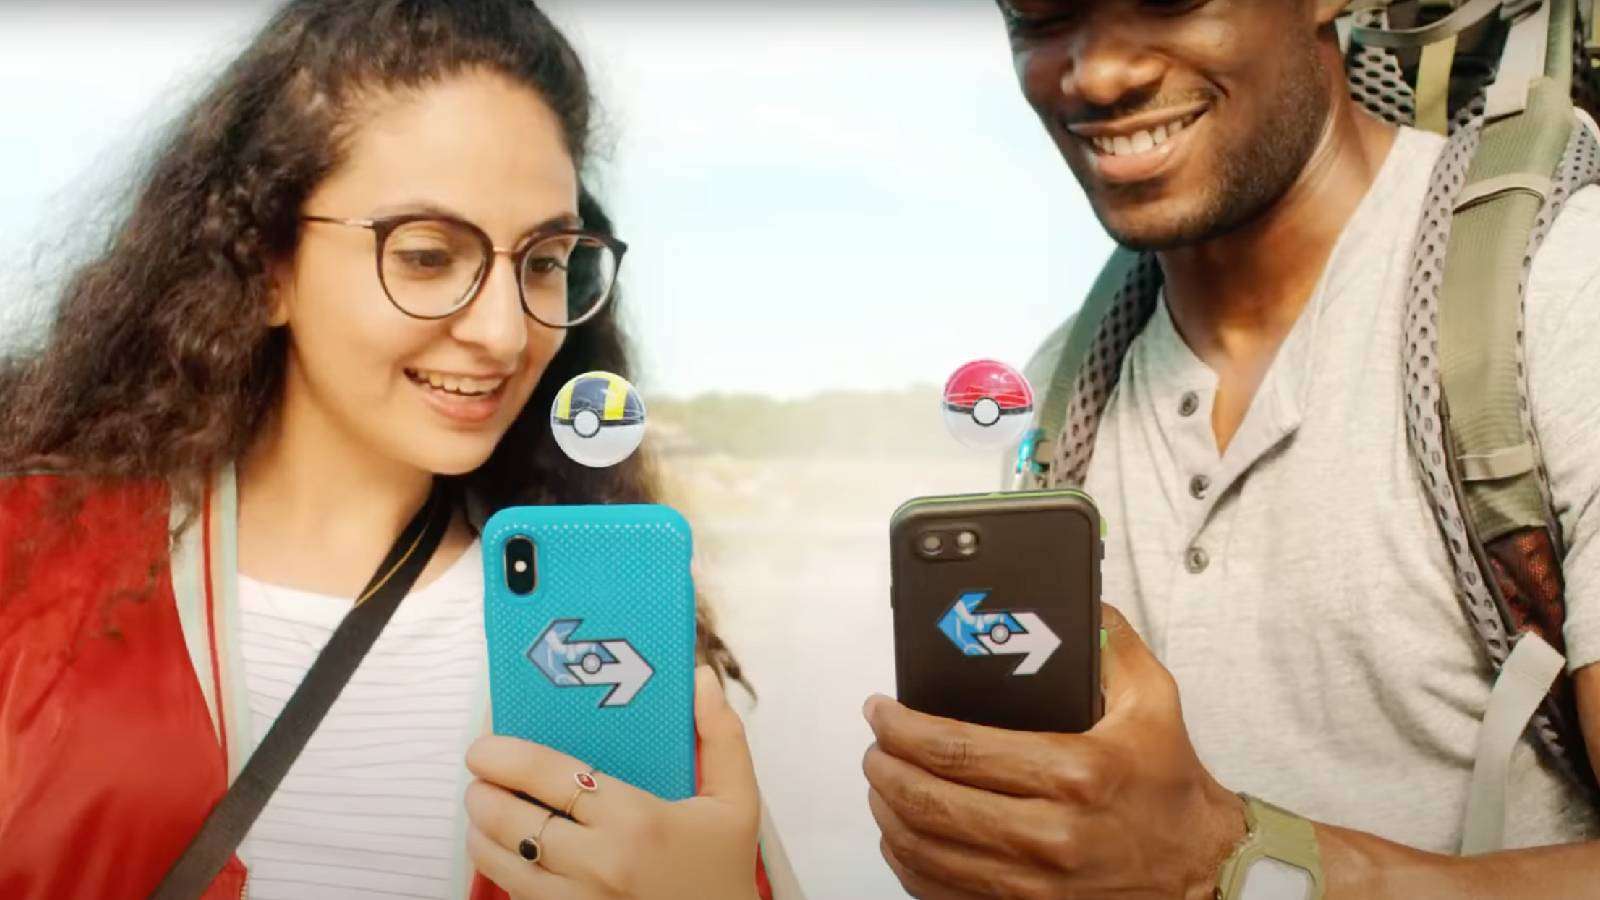 A live action trailer shows two Pokemon Go players preparing to trade, with virtual Poke Balls appearing above their phones